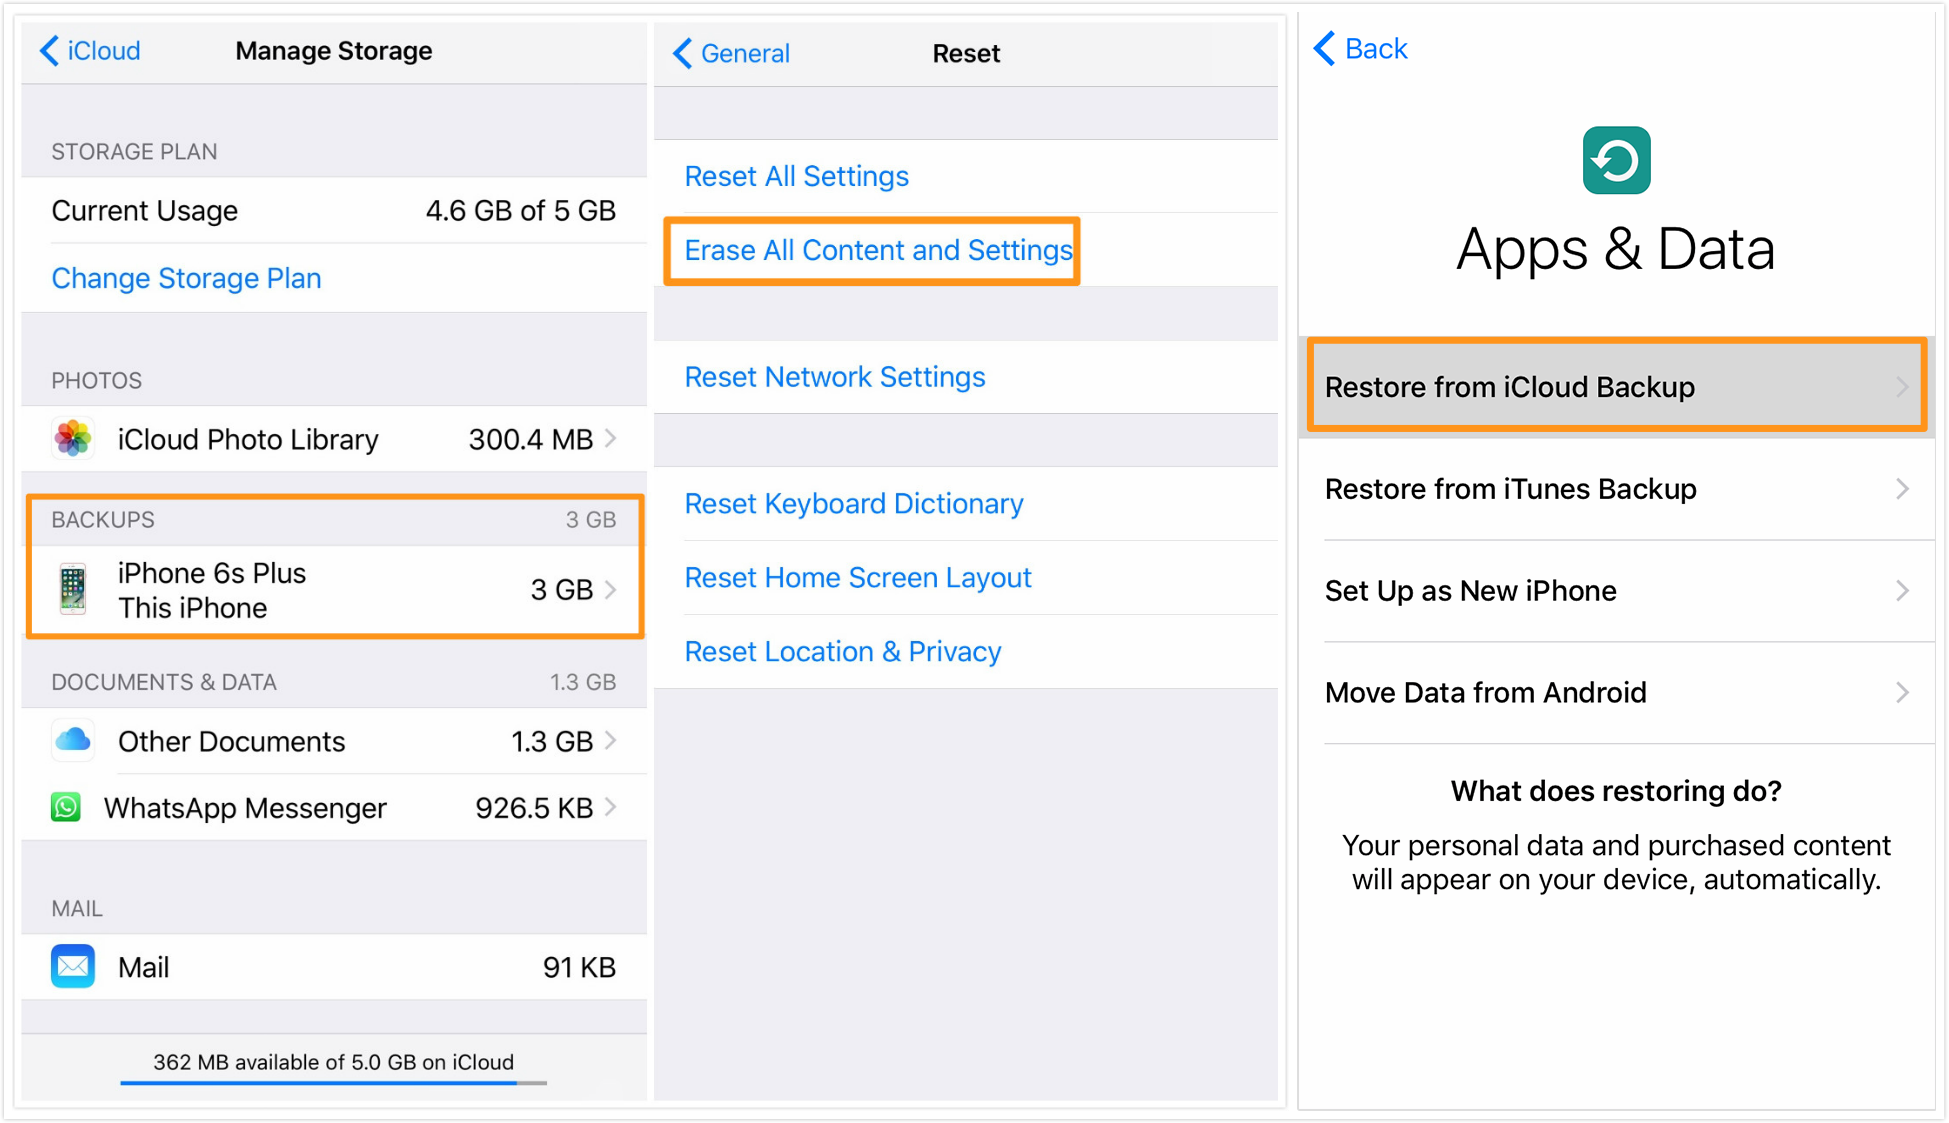 How to Find Deleted Contacts on iPhone 6/6s/7 via Restoring